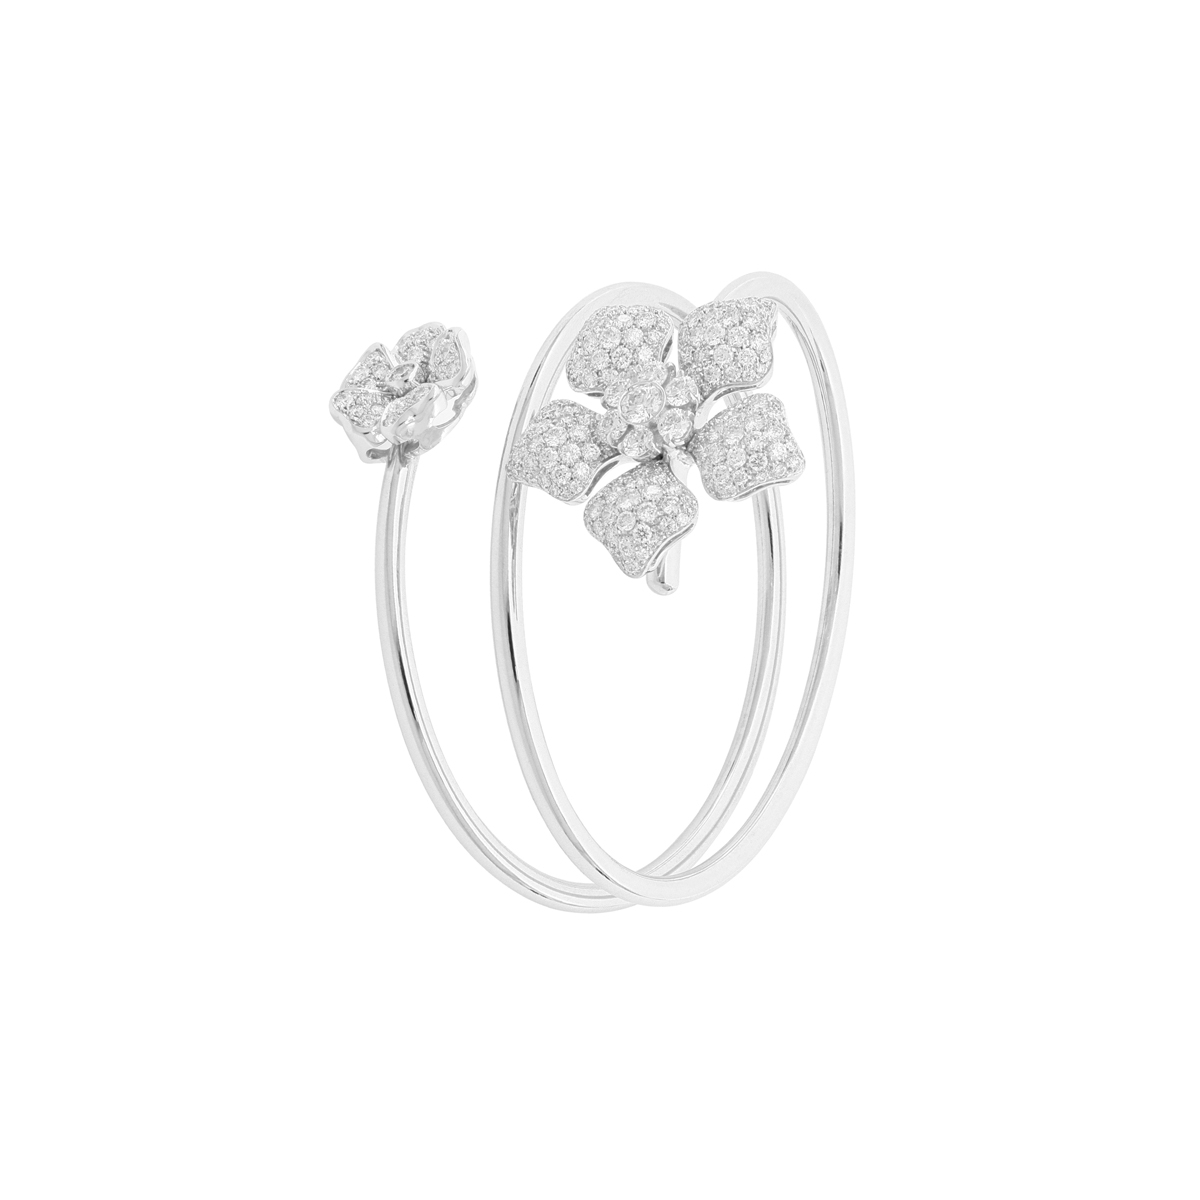 Two Diamond Flower Spiral Ring in White Gold